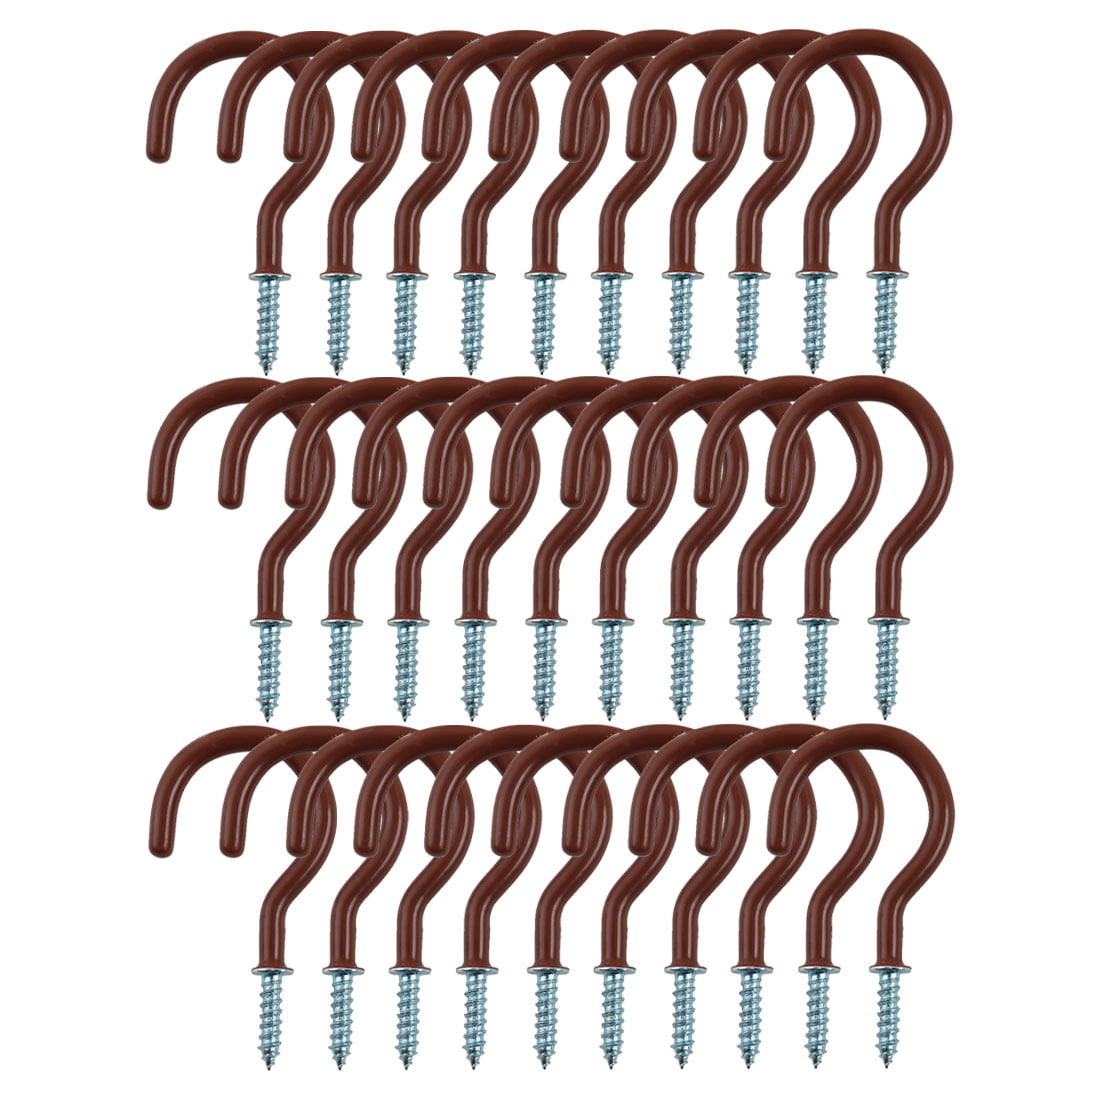 Unique Bargains 50pcs Cup Ceiling Hooks 1/2 Inch Metal with Vinyl Coated  Screw in Holder Brown